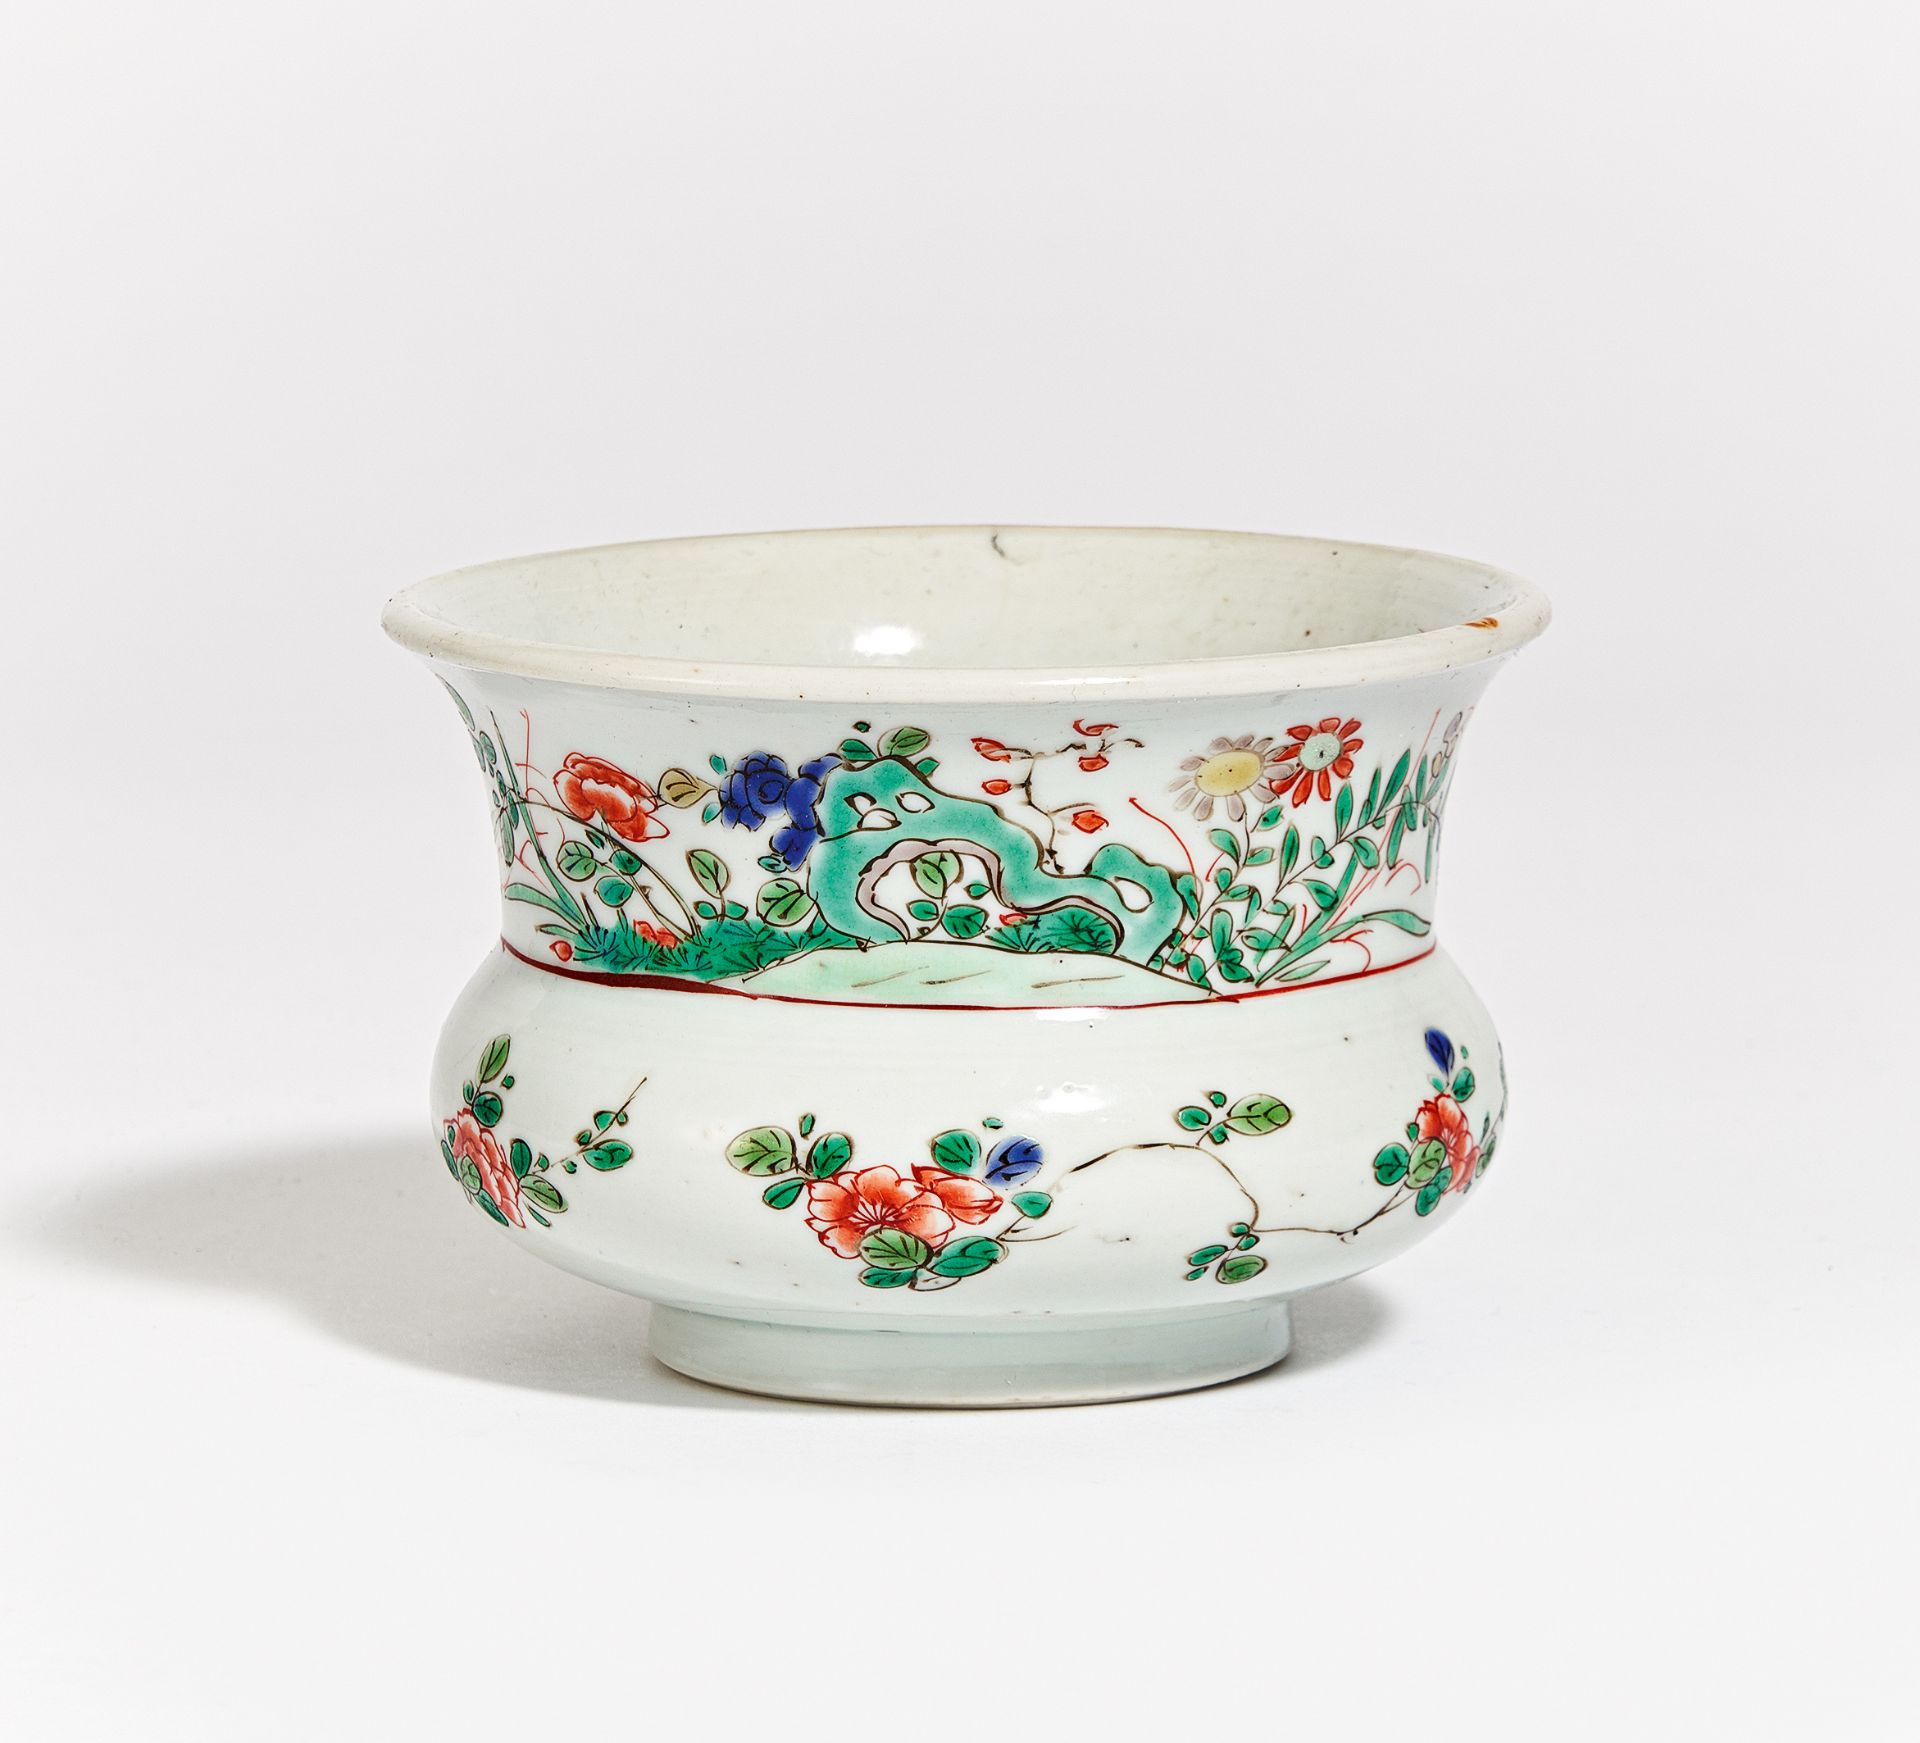 SMALL SPITTON WITH FLORAL DECOR. China. Qing dynastie (1644-1911). Porcelain, painted in famille